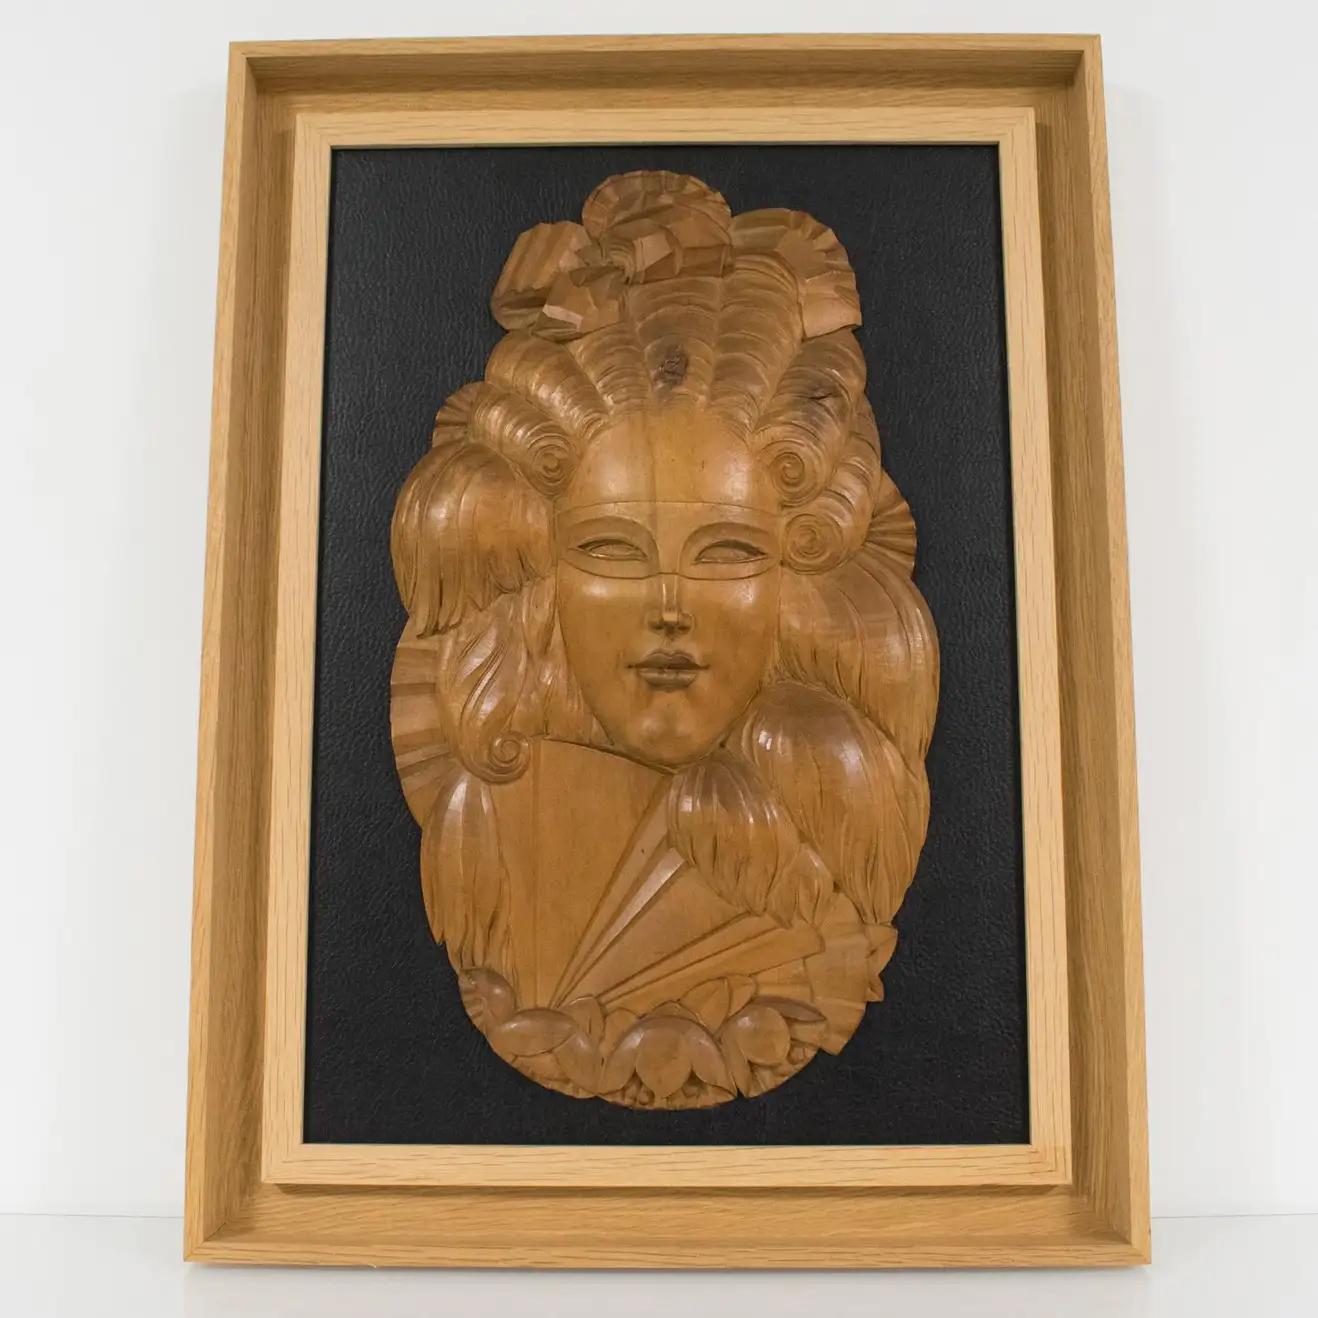 Art Deco Handcrafted Wood Panel Wall Sculpture Venetian Mask, 1930s For Sale 7